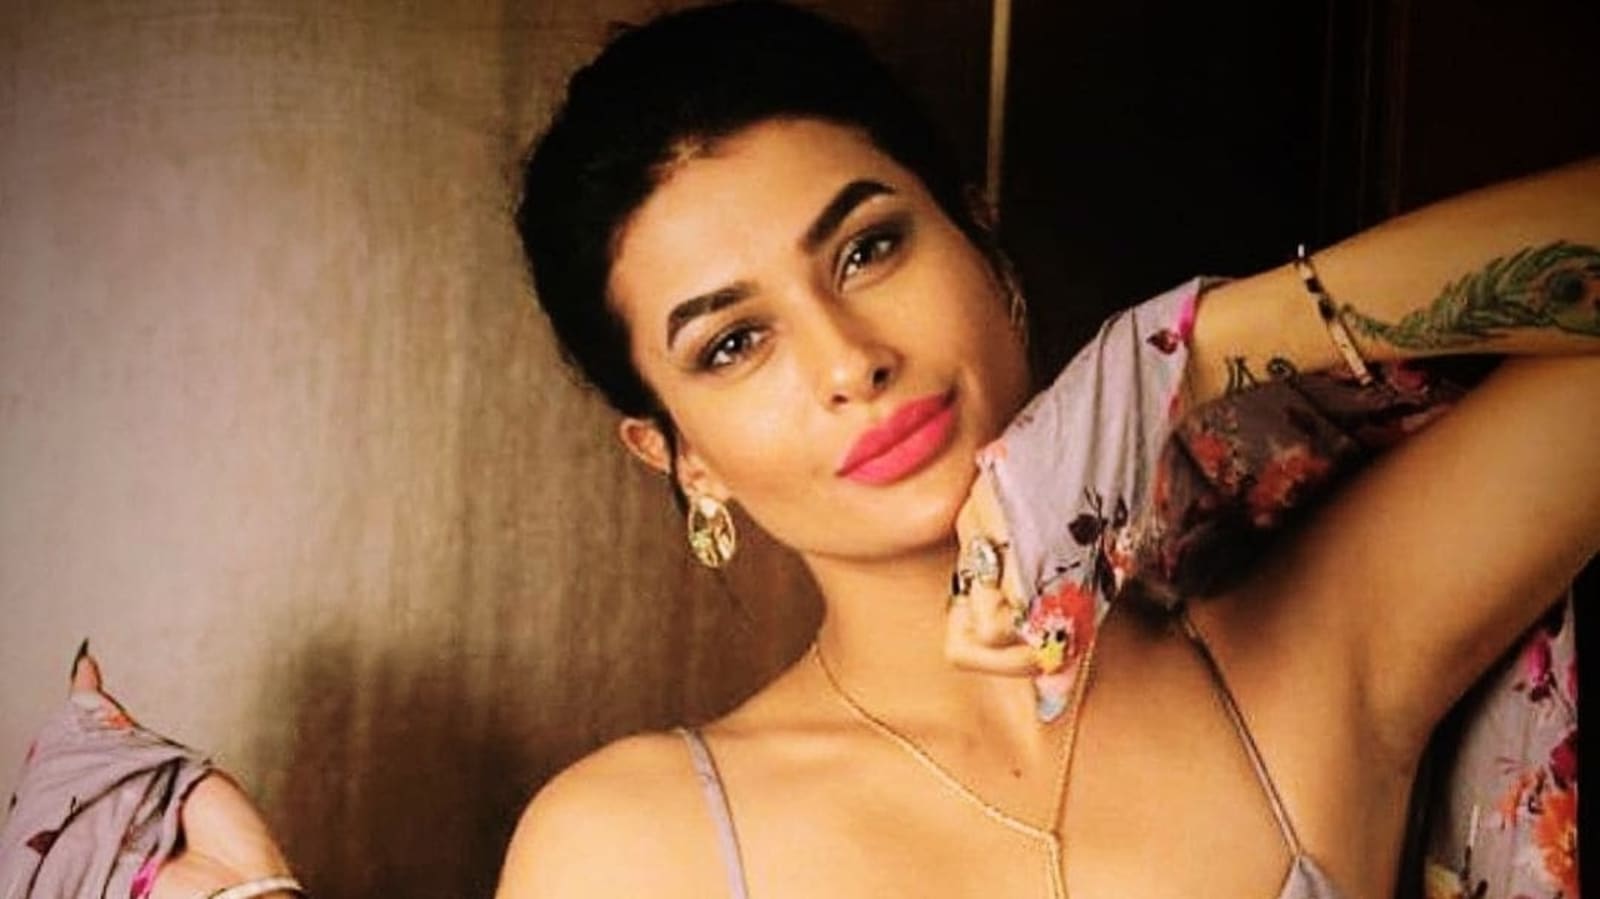 Just who is Pavitra Punia? - Rediff.com